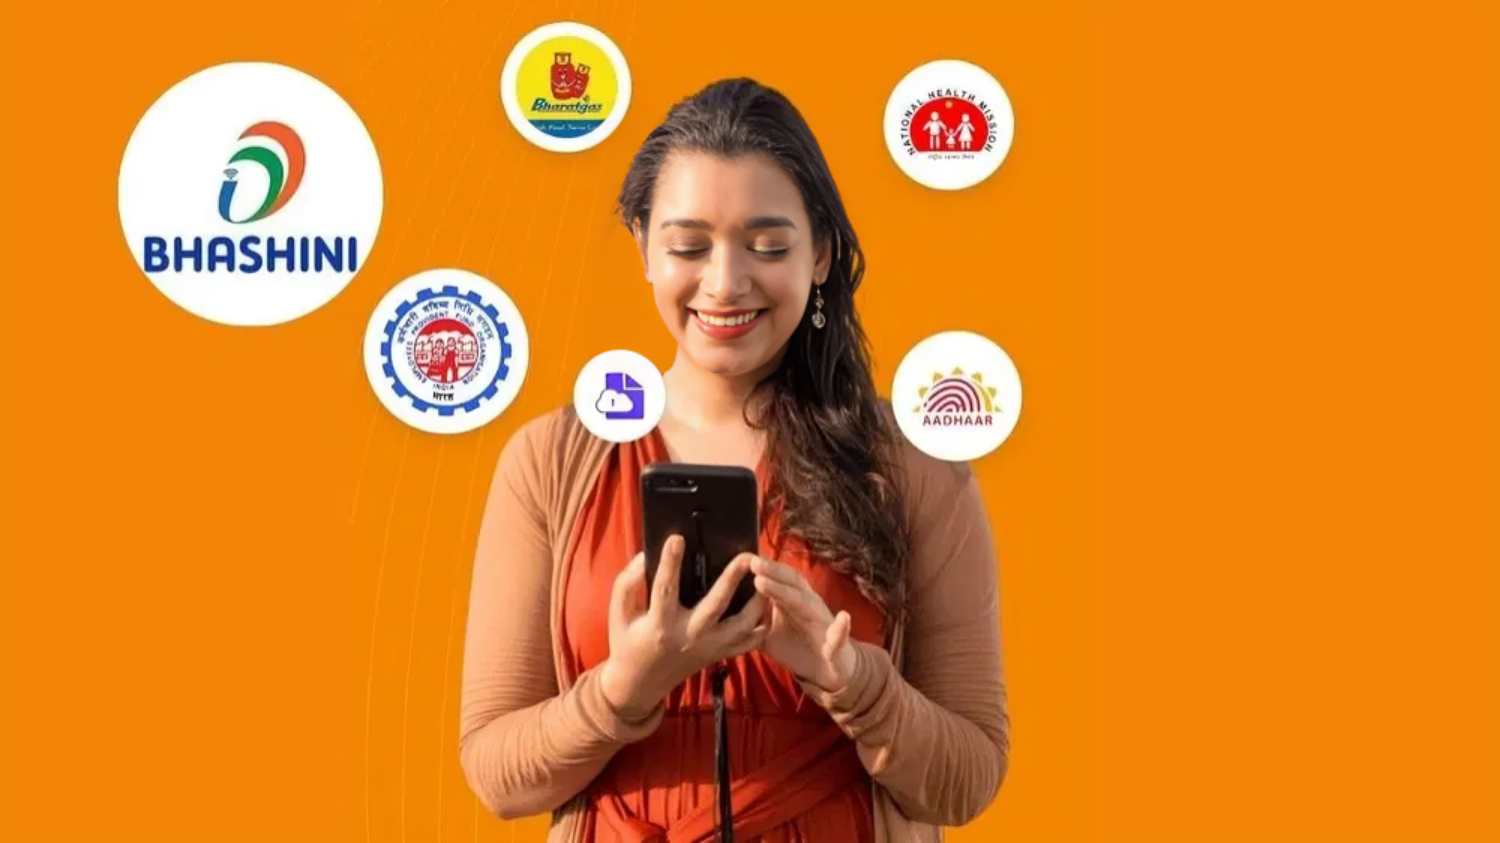 Picture of Umang Bhashini: This government tool will convert words to voice, support 11 languages